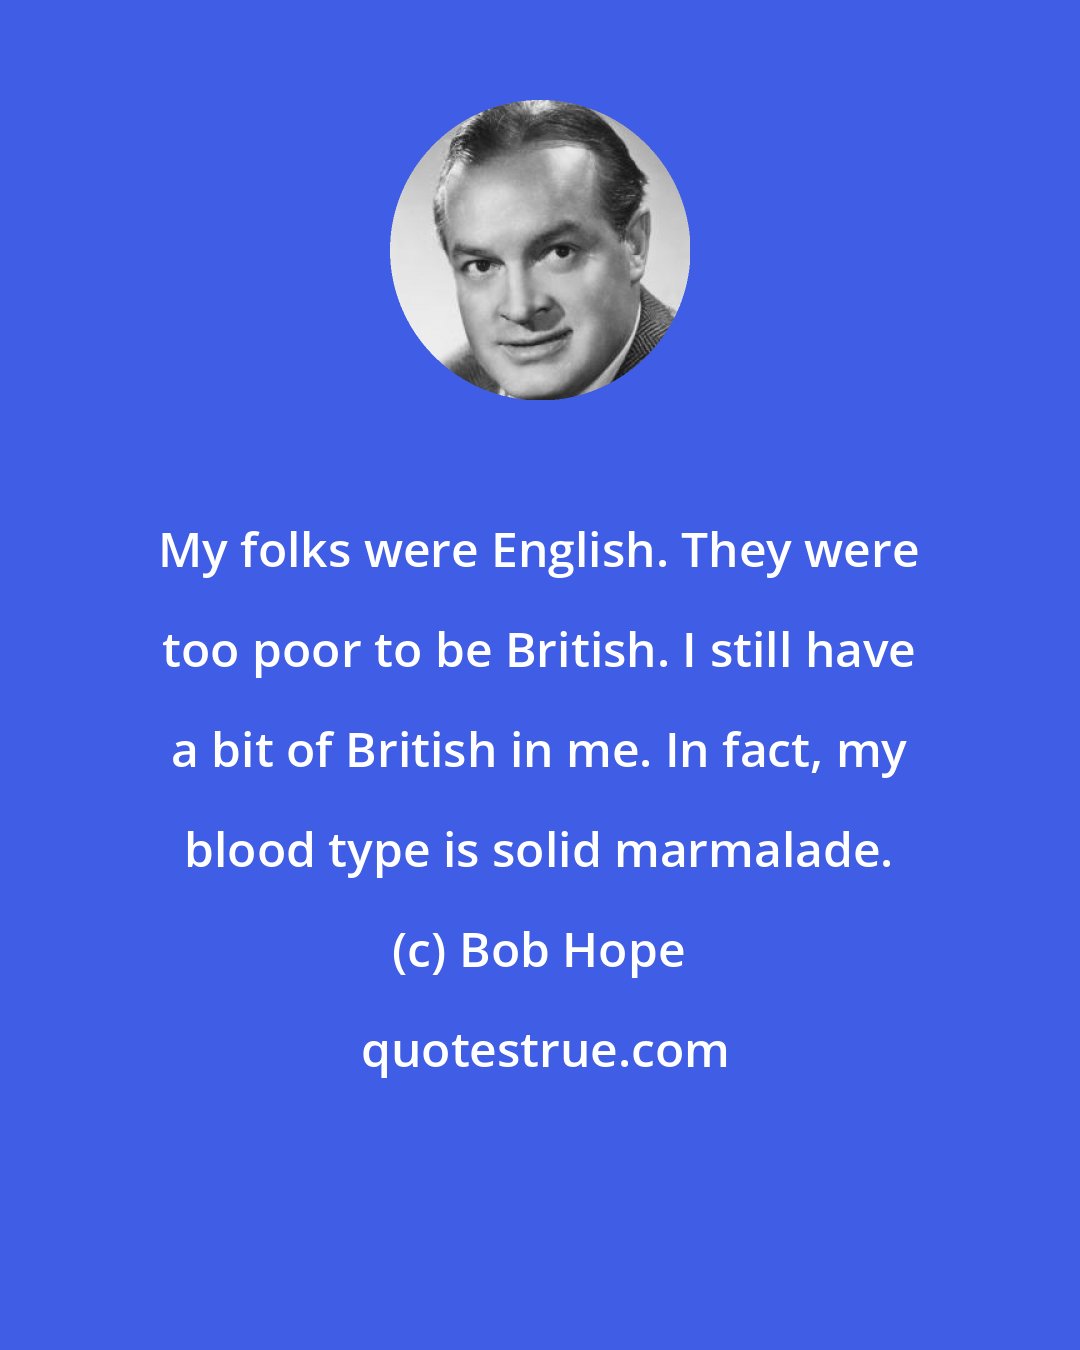 Bob Hope: My folks were English. They were too poor to be British. I still have a bit of British in me. In fact, my blood type is solid marmalade.